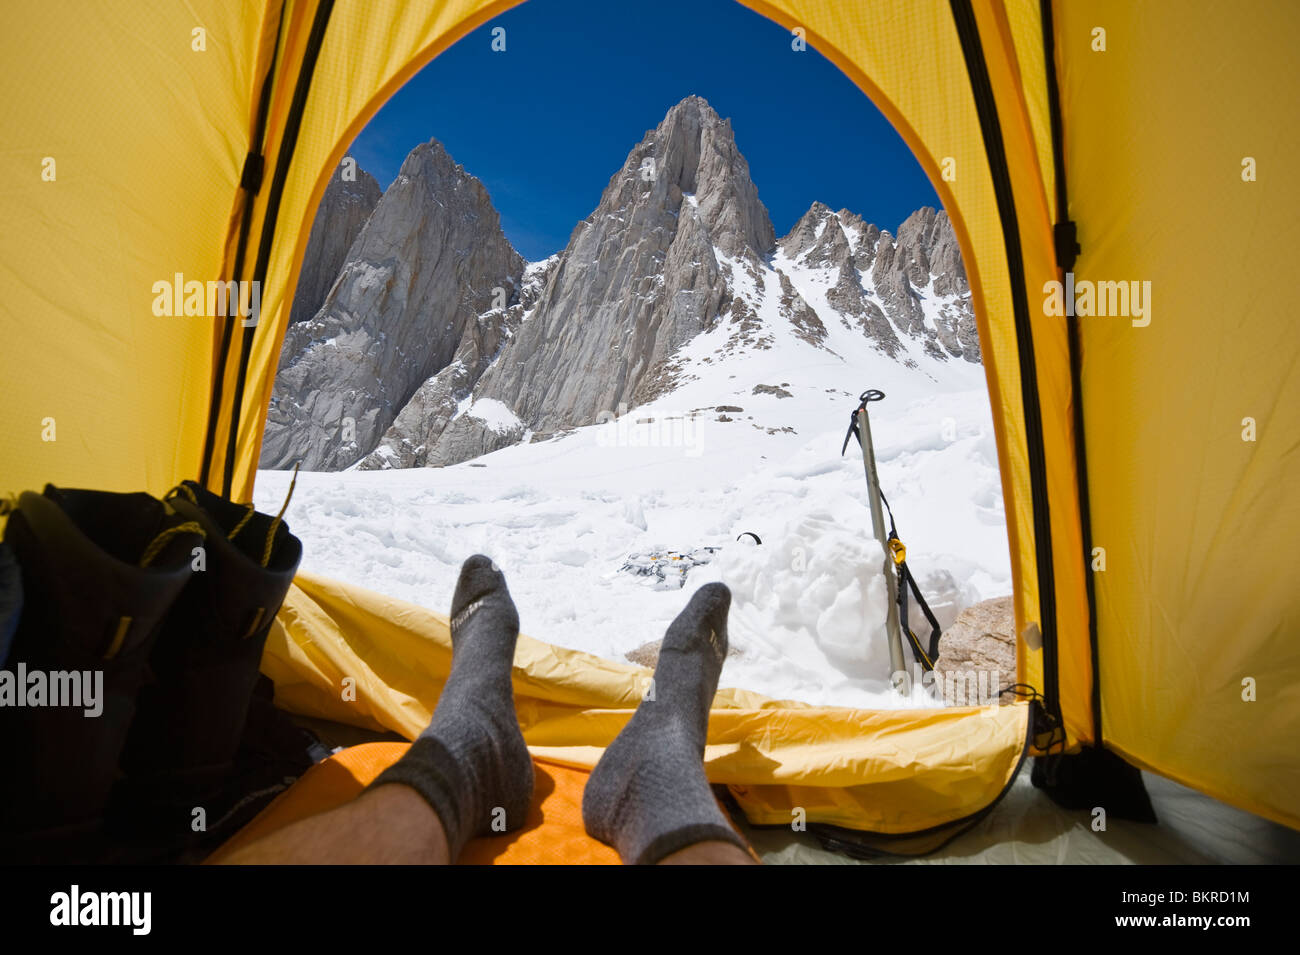 View from tent in winter campsite at Iceberg lake (12,600 ft - 3850 m) to east face of Mount Whitney, California Stock Photo